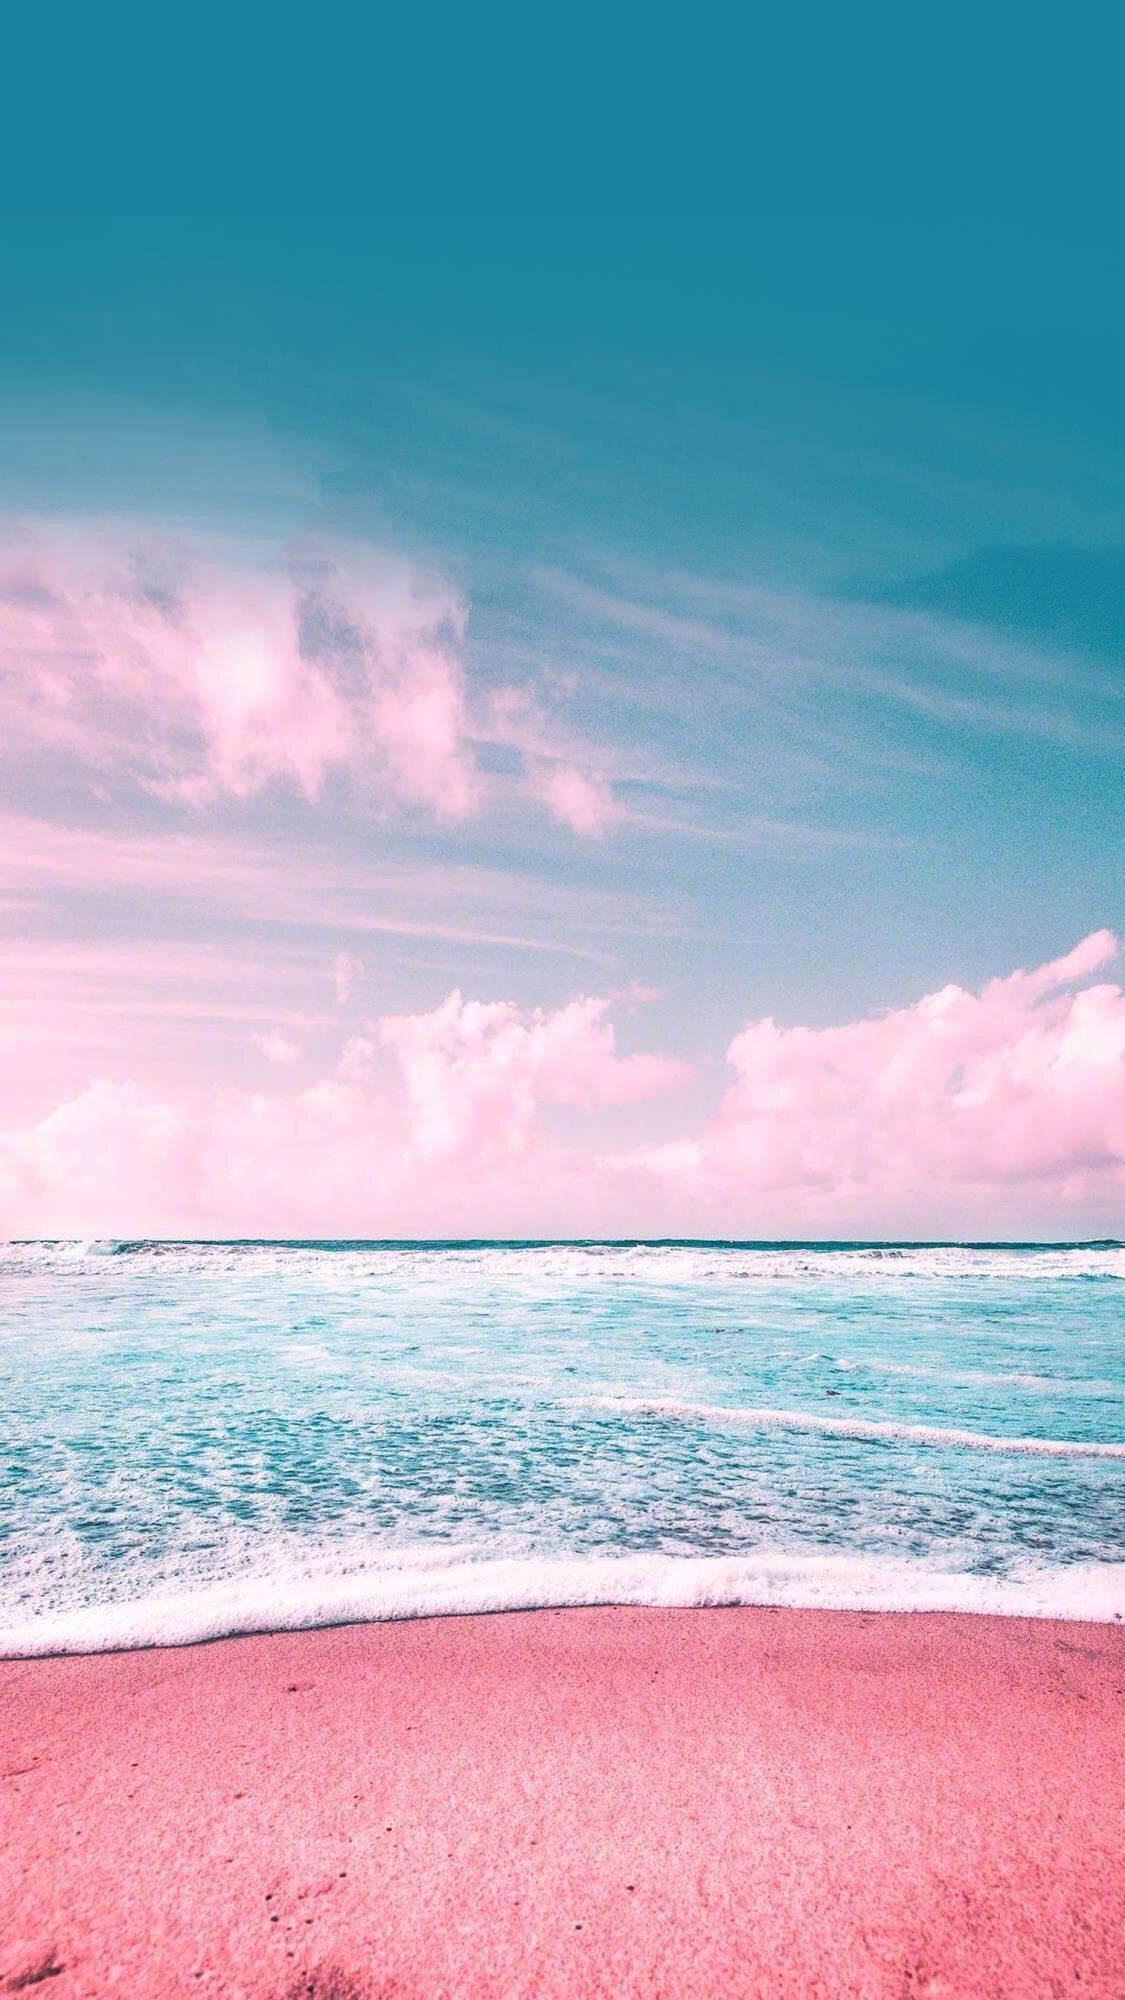 Aesthetic Pink Clouds And Sea Wallpapers - Wallpaper Cave